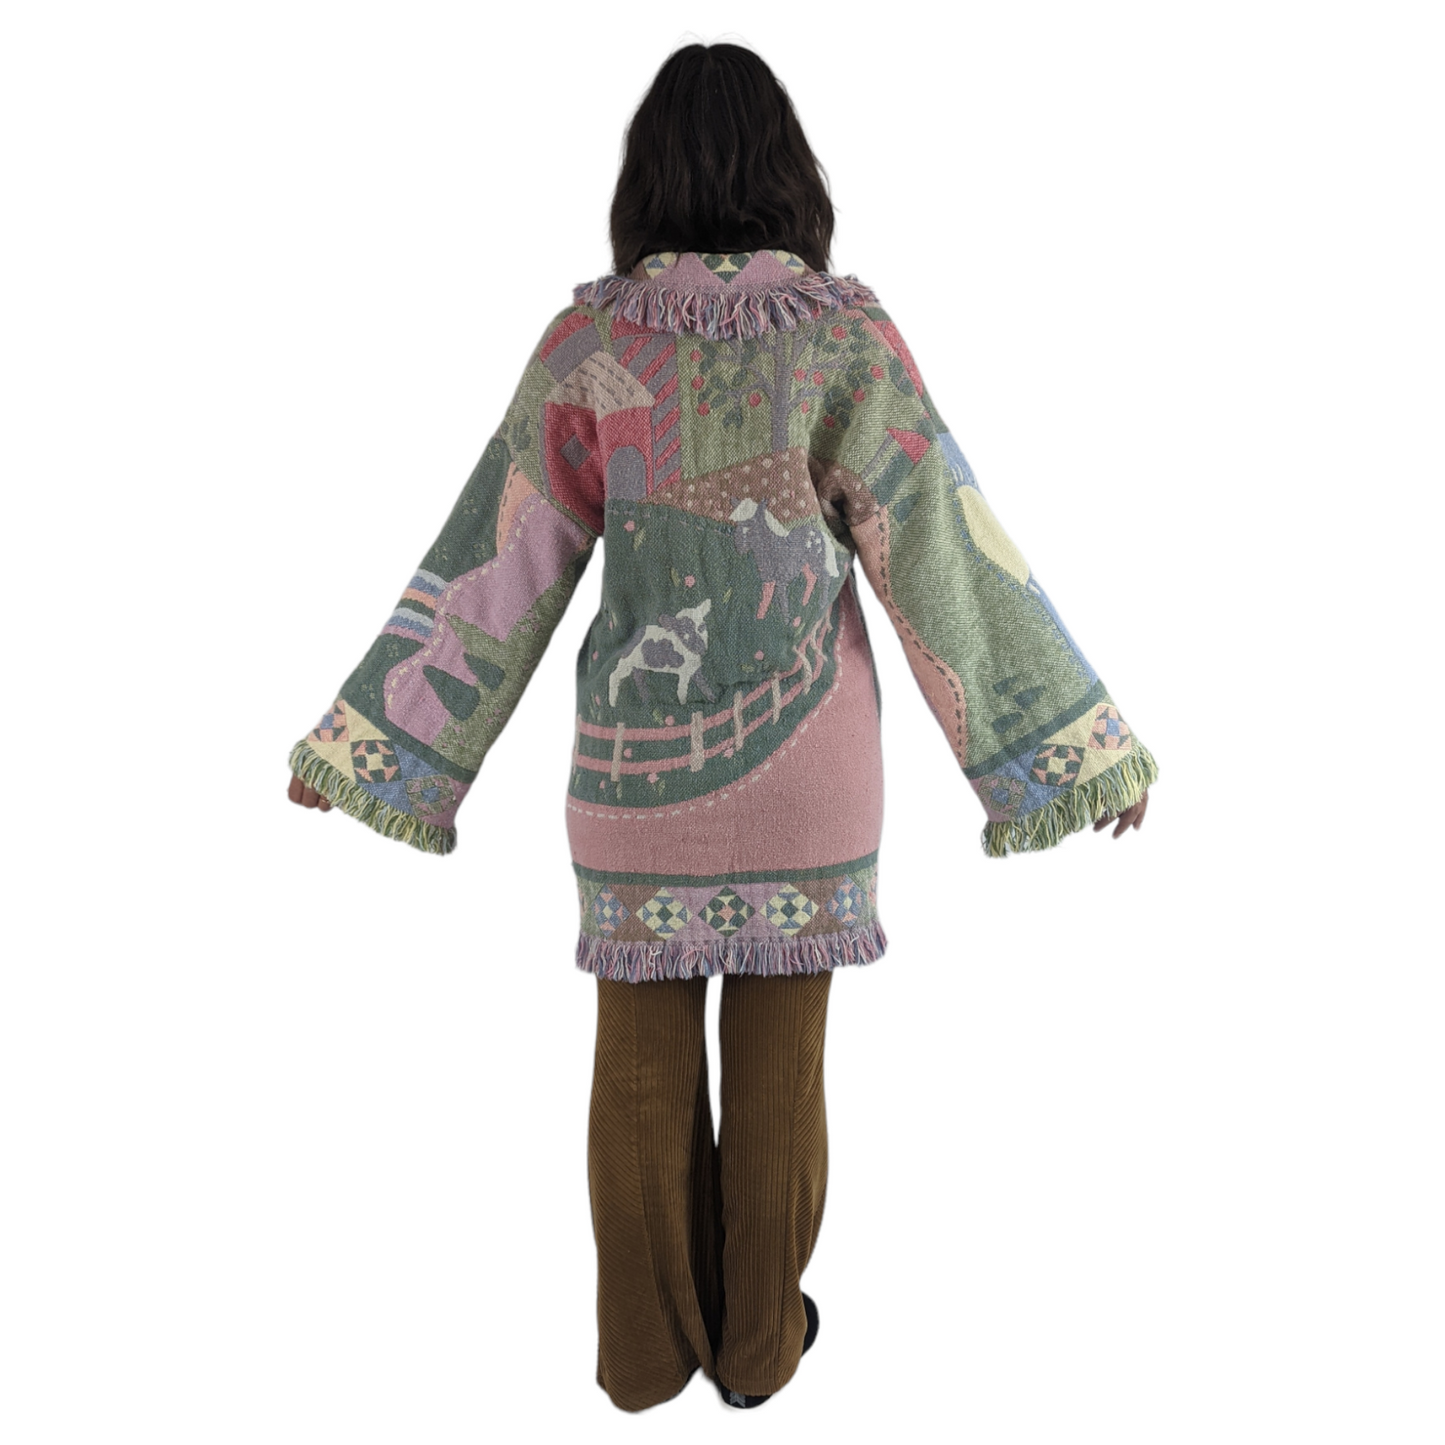 Back view of woman wearing blanket coat that is perfect gift for cow lovers.